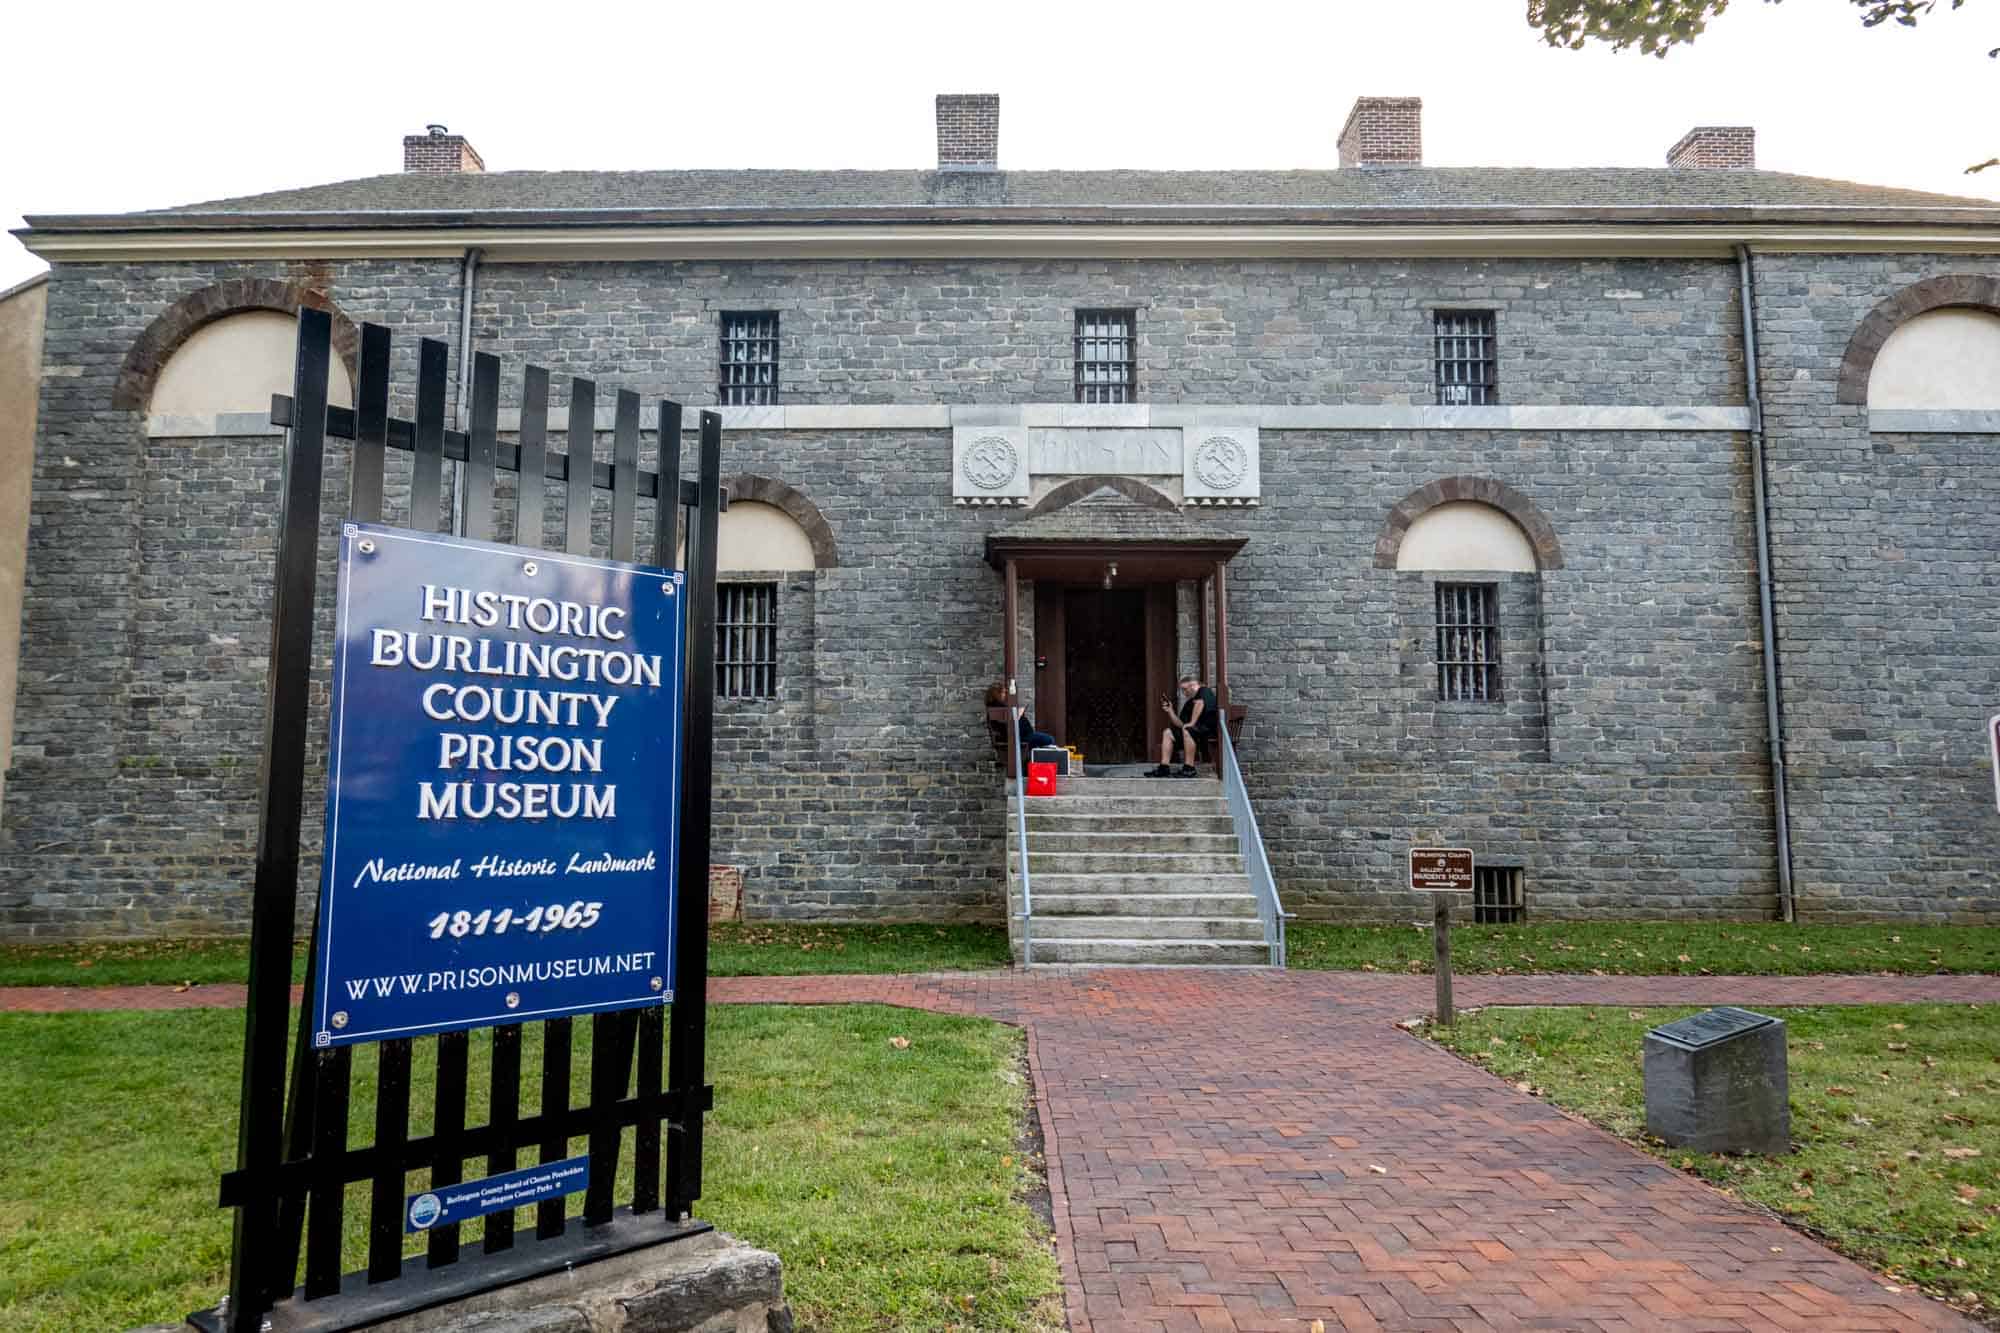 Gray brick building with barred windows behind a sign: "Historic Burlington County Prison Museum"